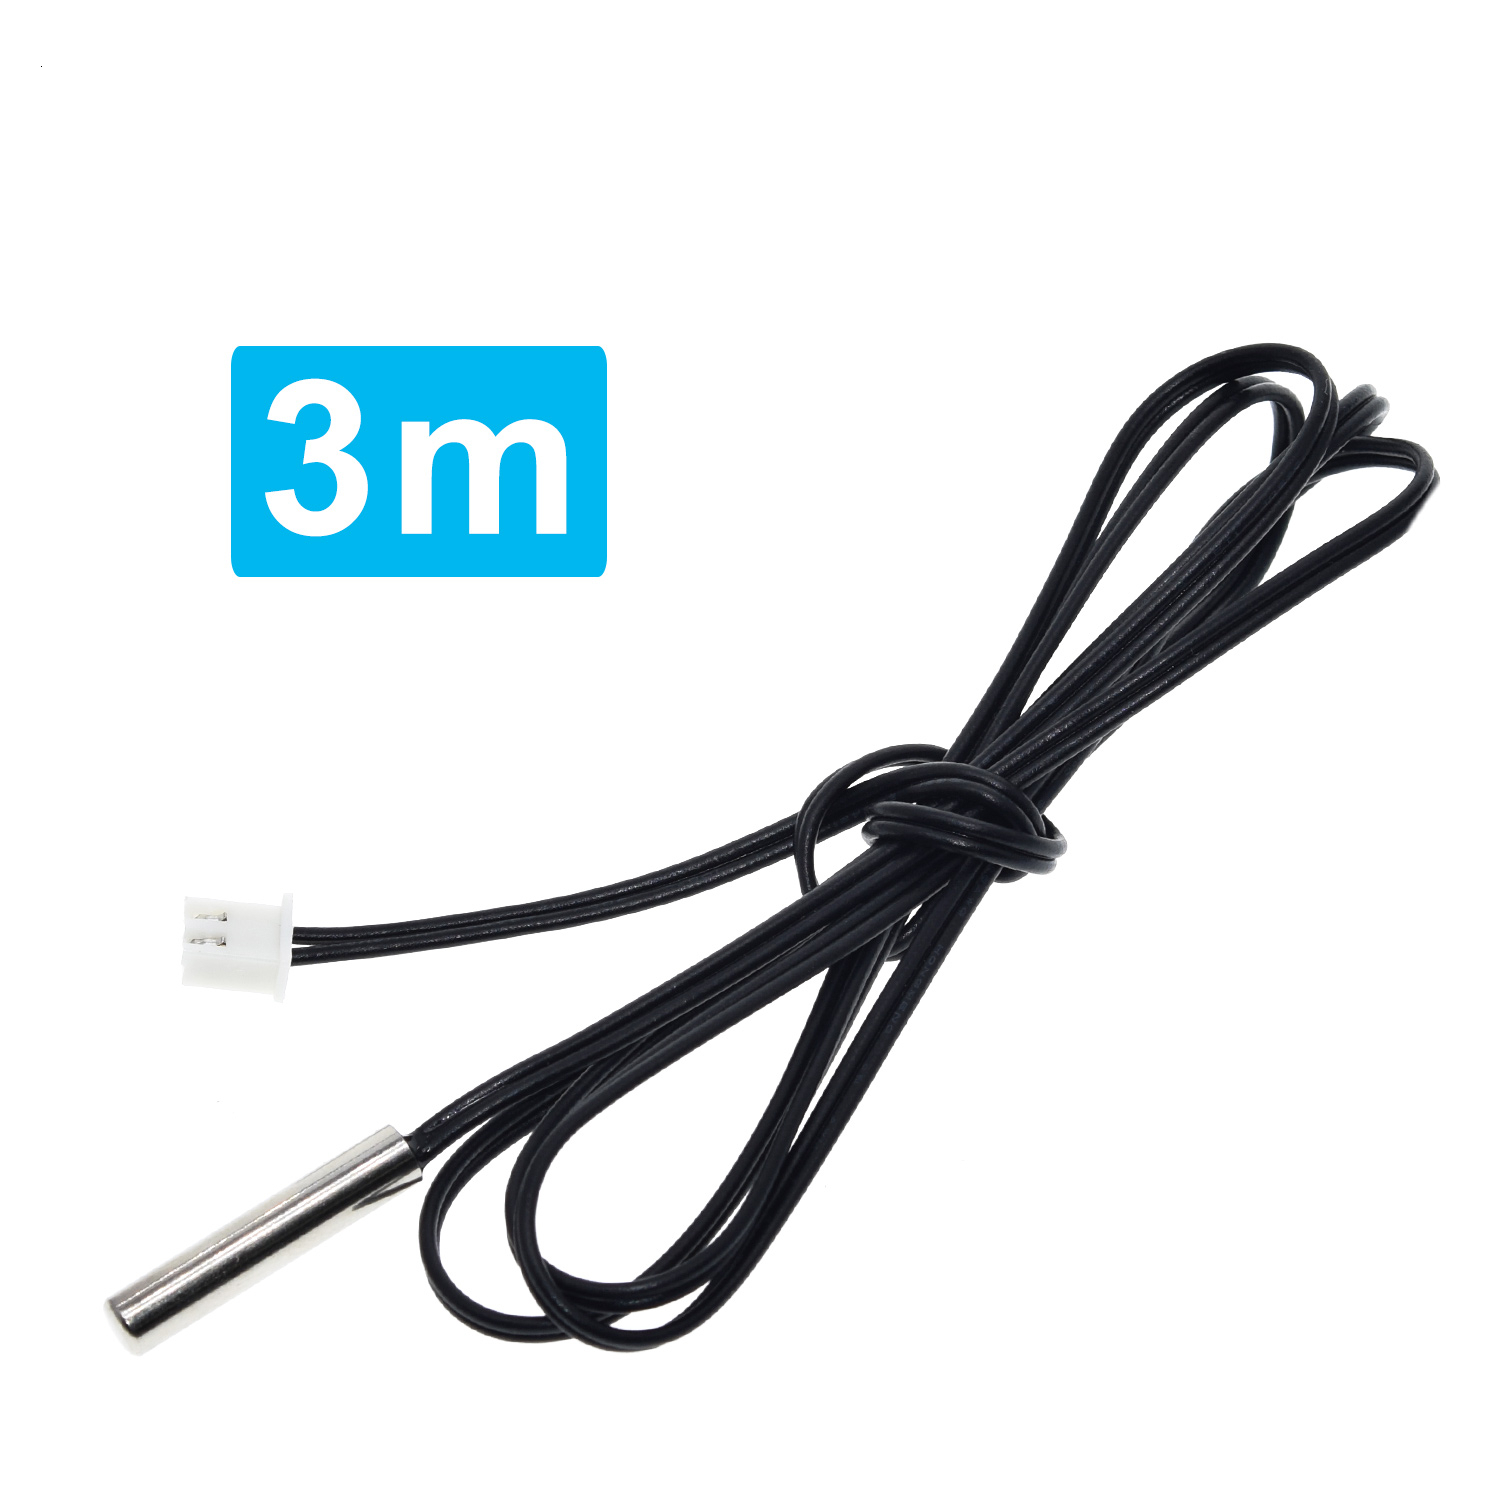 dImg4_3M Cable173.jpg